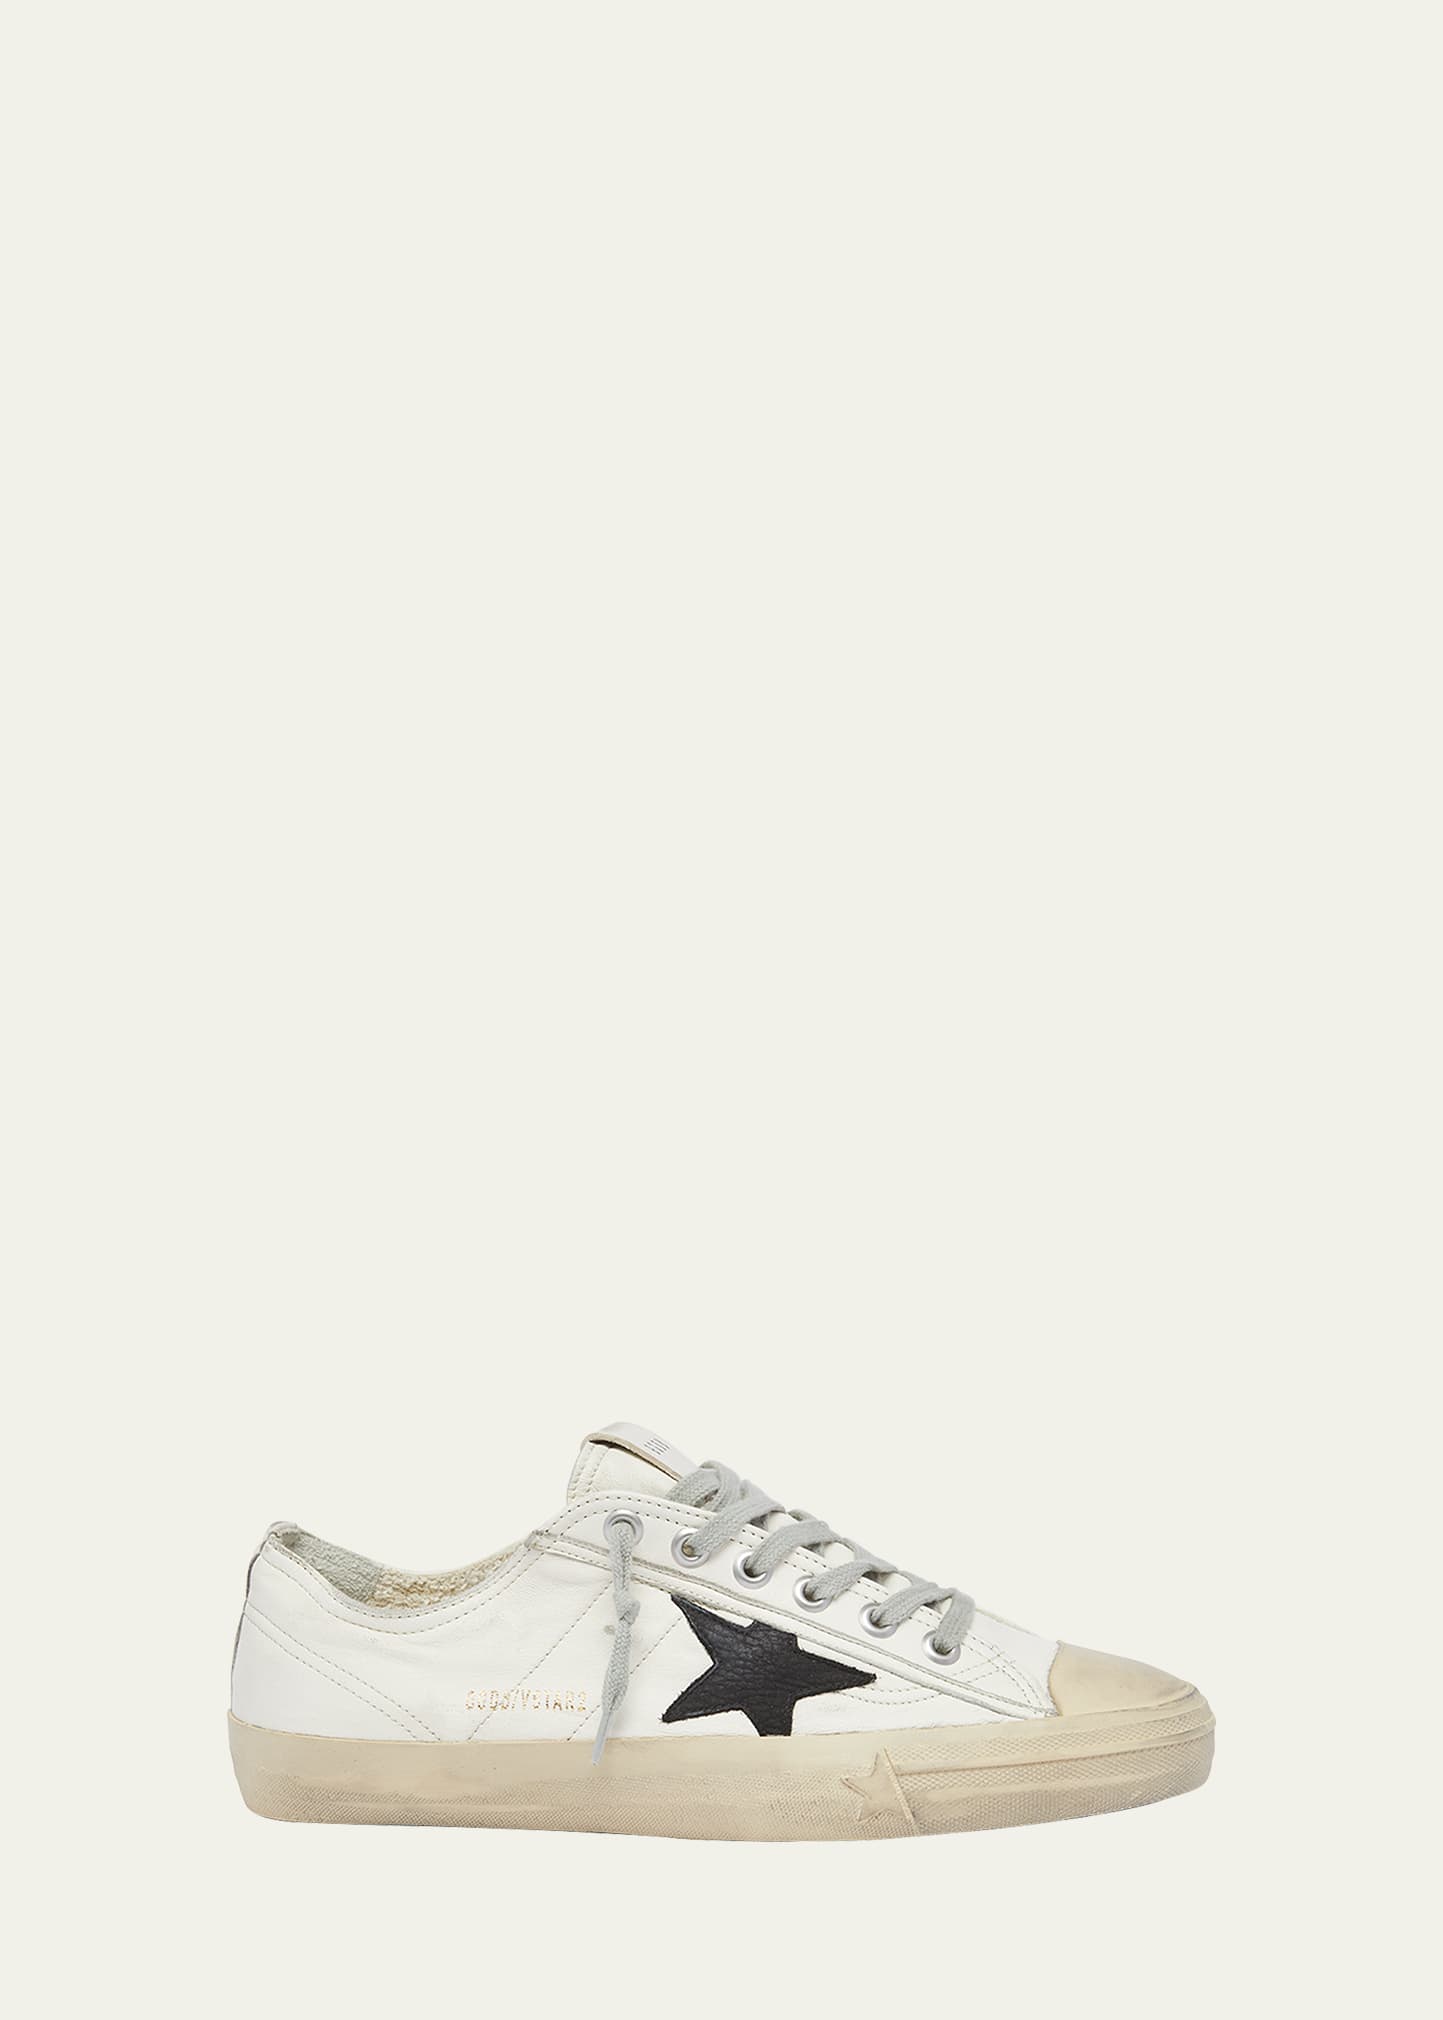 Shop Golden Goose Men's V-star 2 Nappa Leather Low-top Sneakers In Dirty White/black